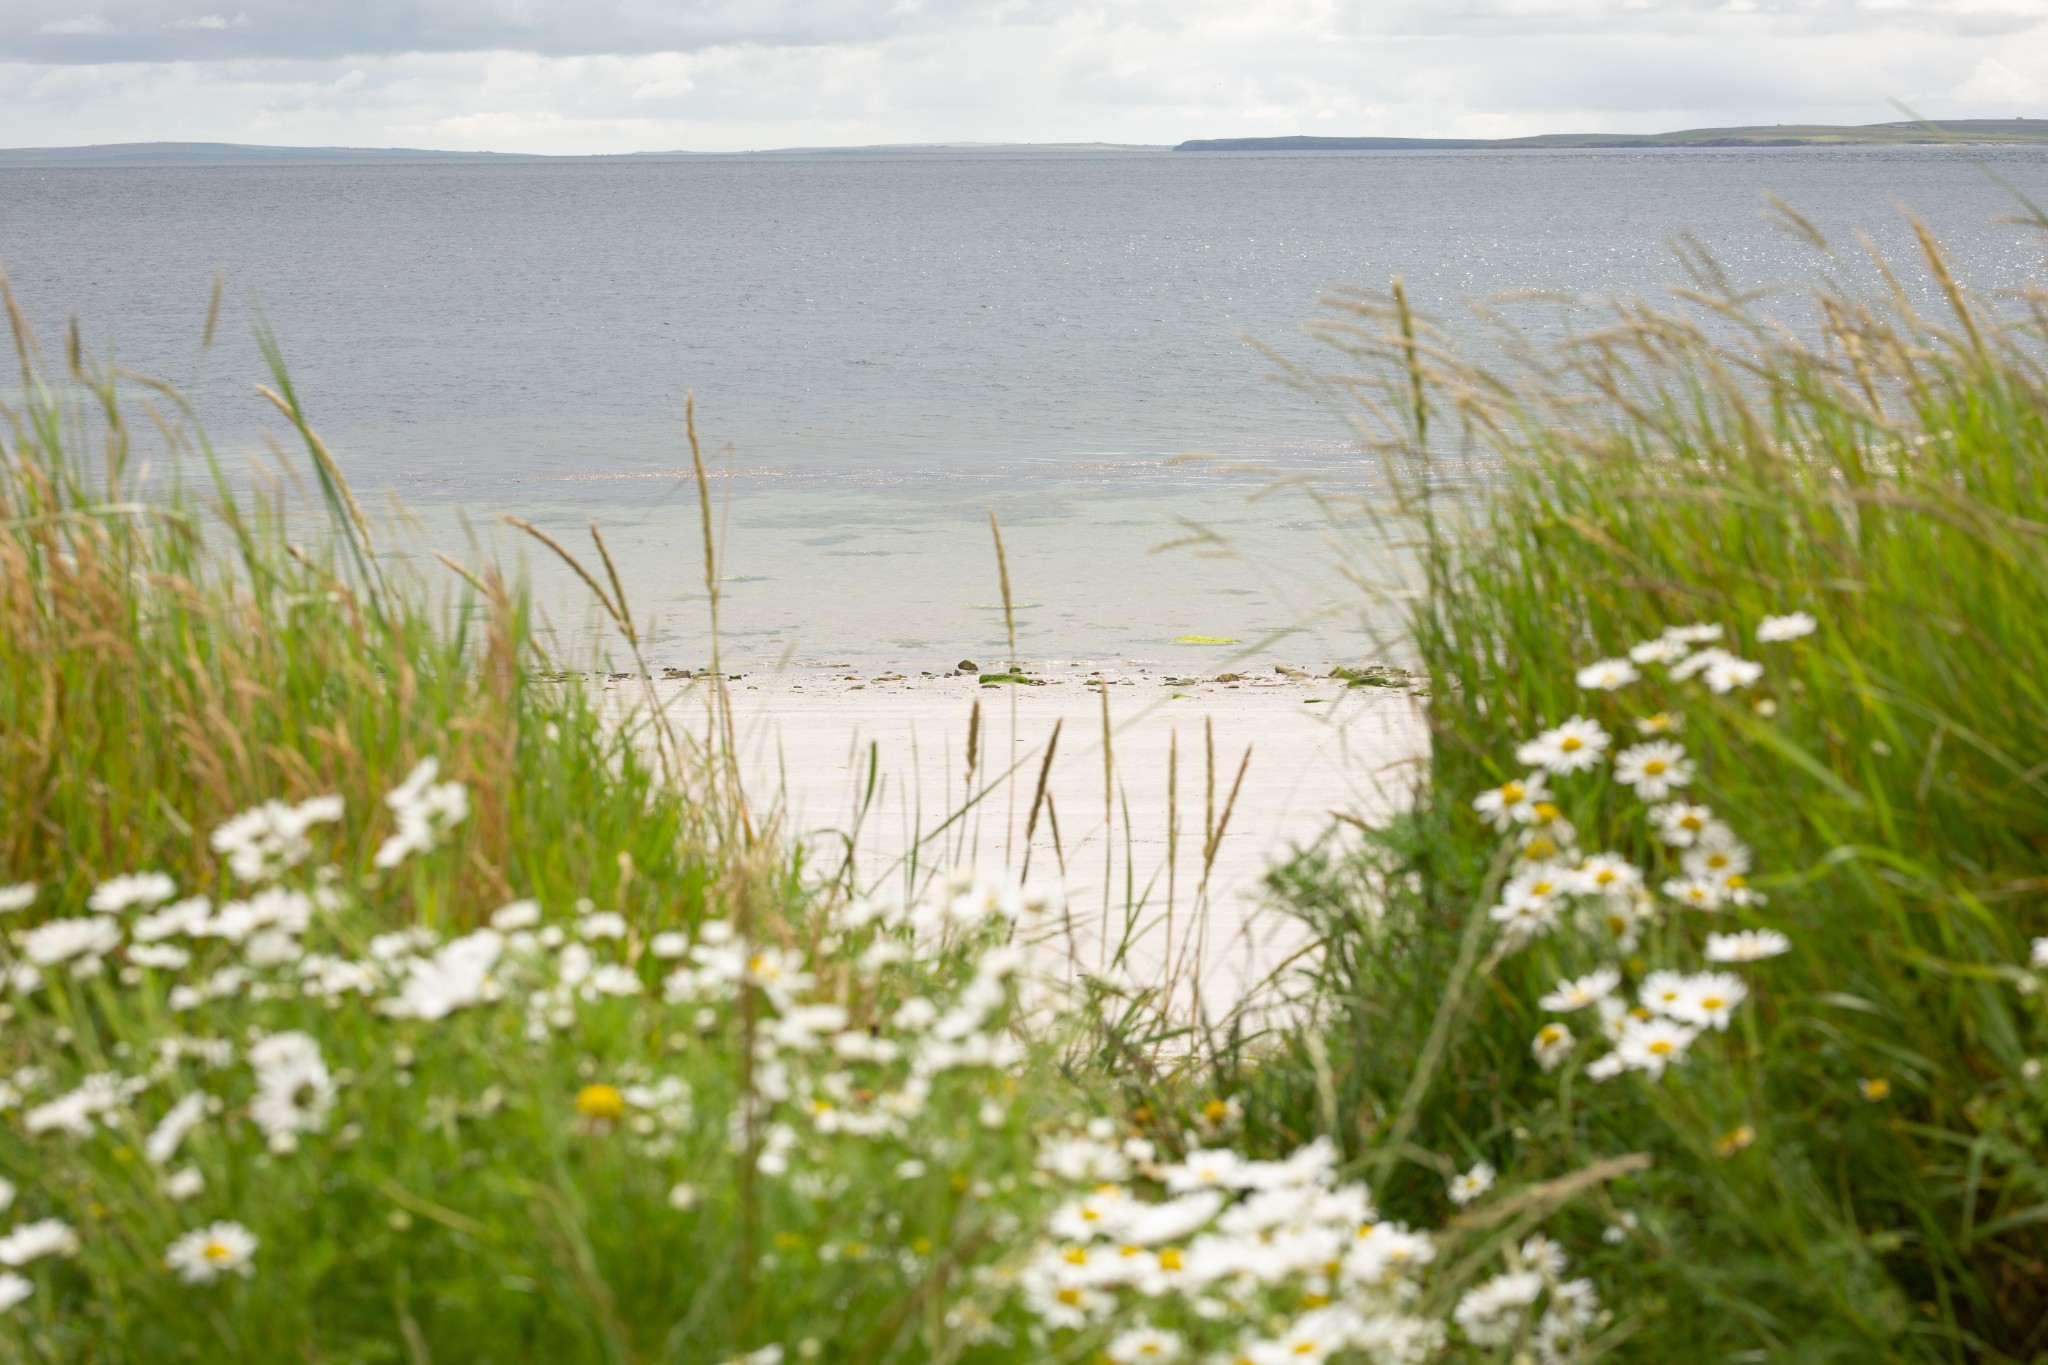 The beach at the Bay of Greentoft, Eday, Orkney